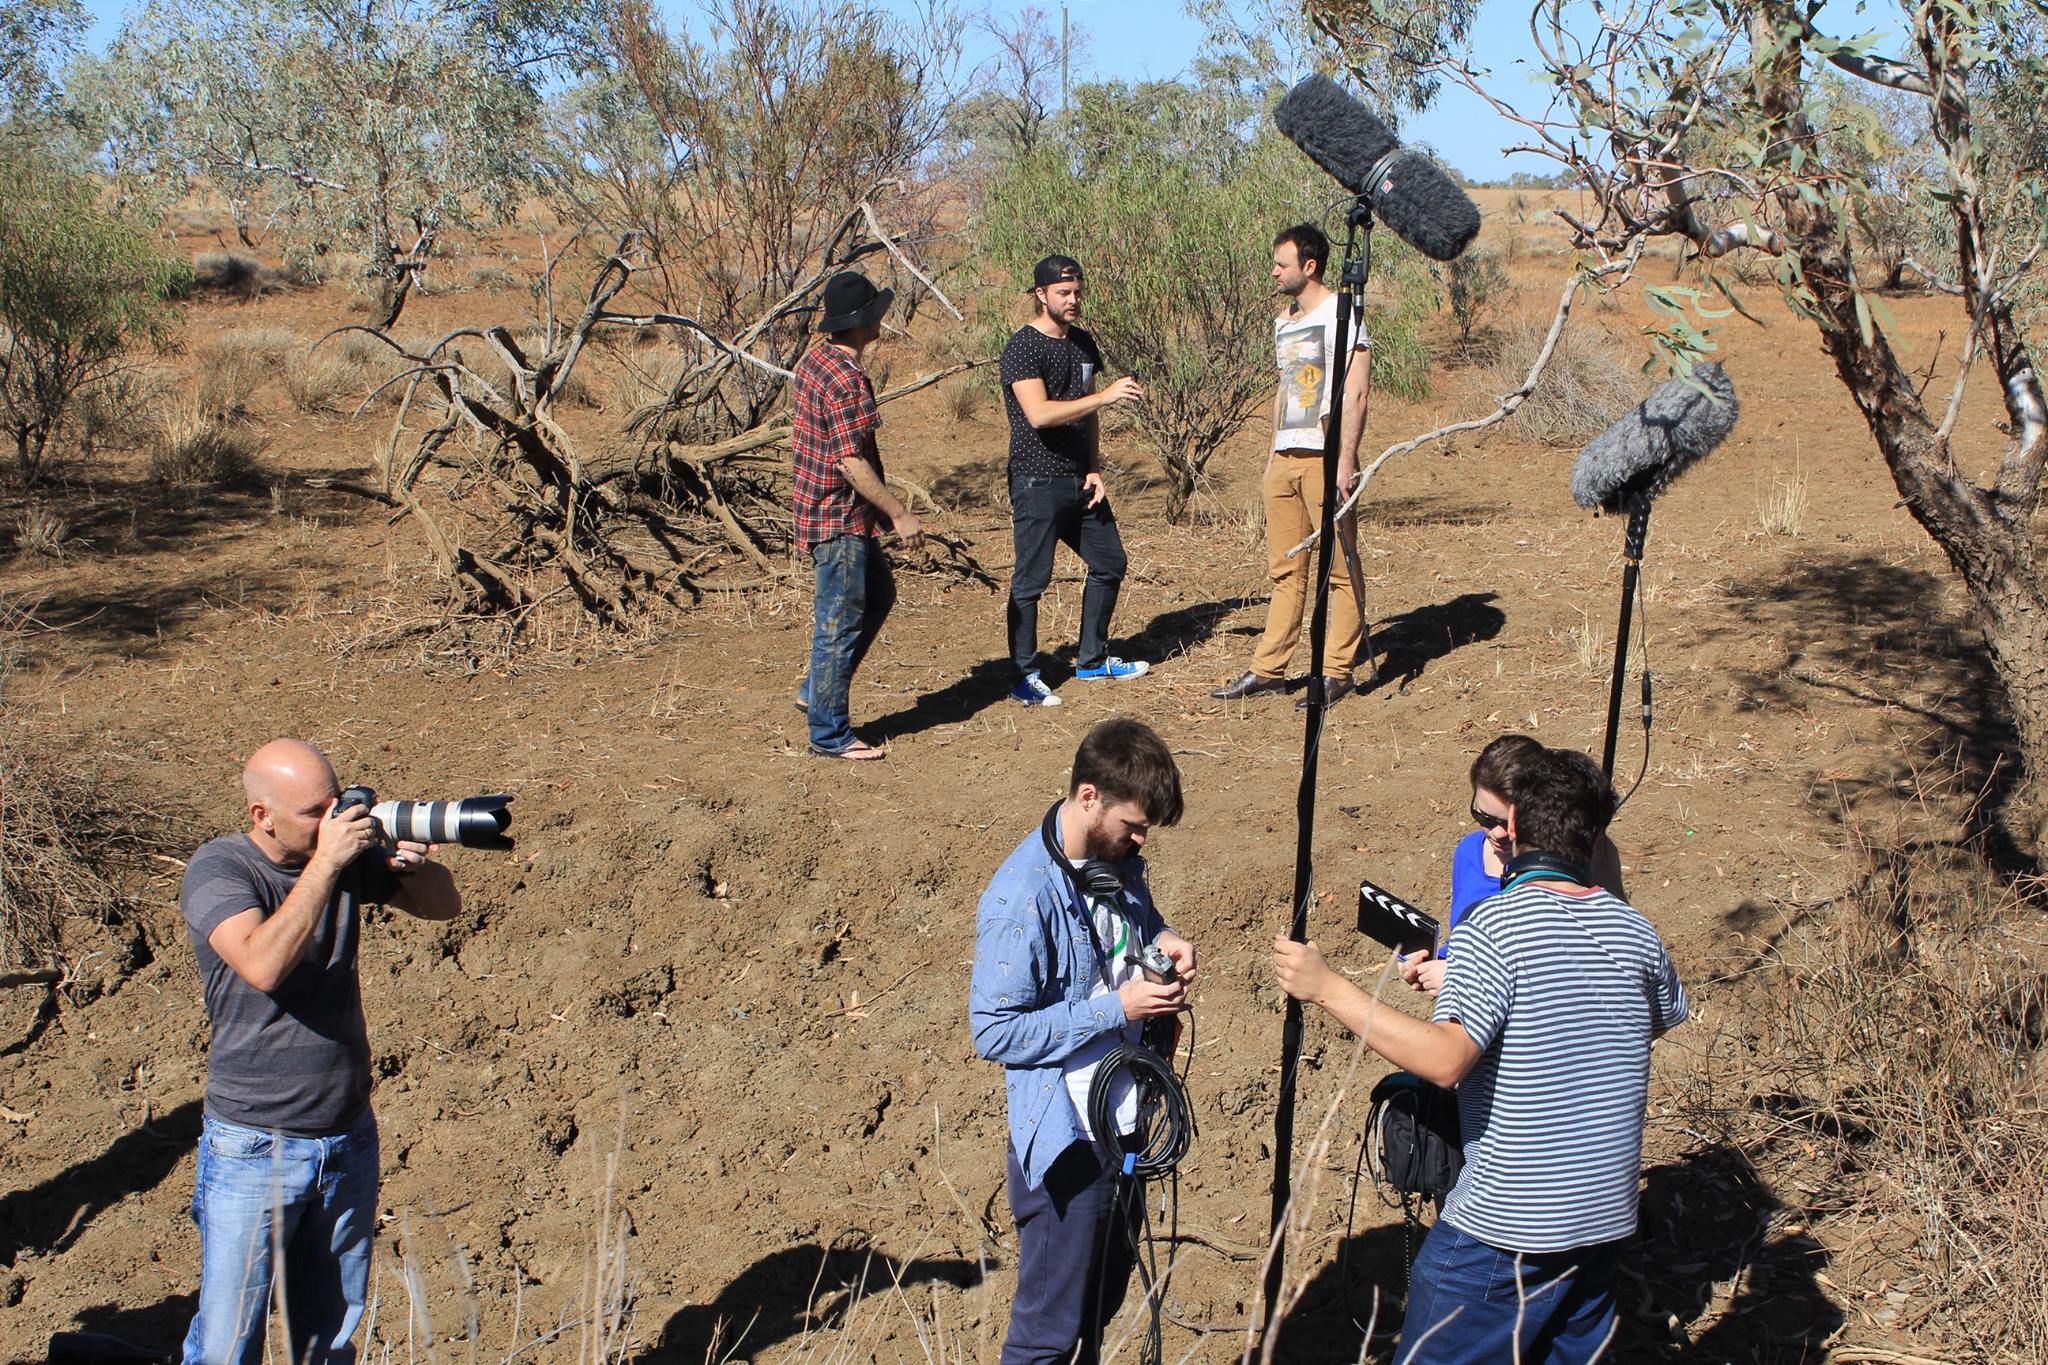 During filming in outback Queensland.